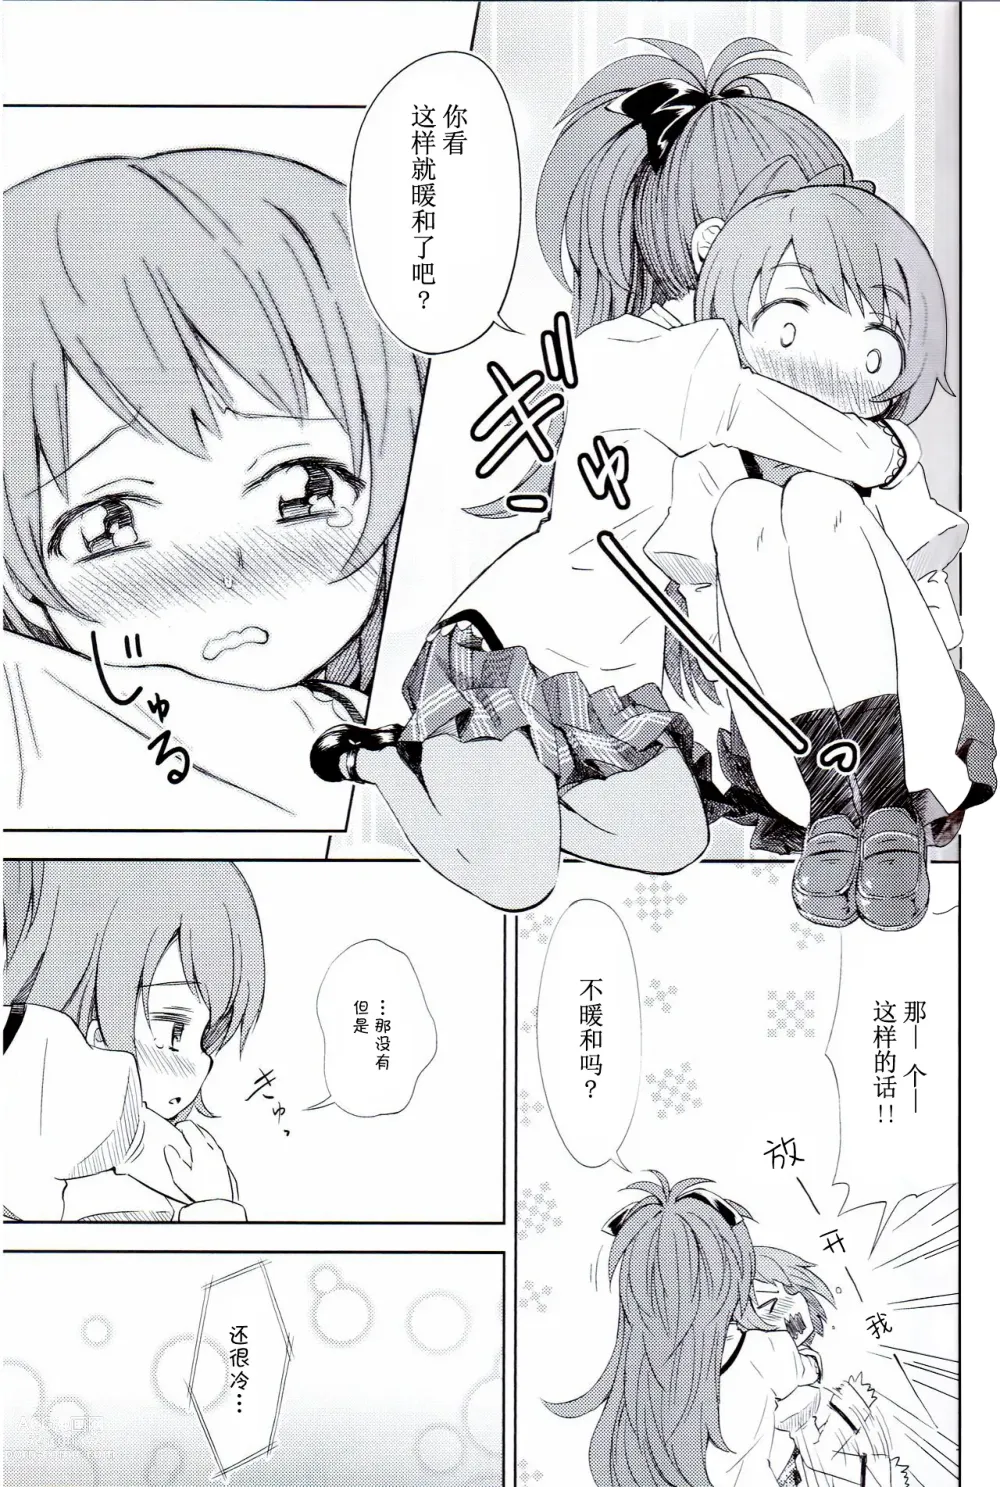 Page 10 of doujinshi Lovely Girls Lily vol. 5